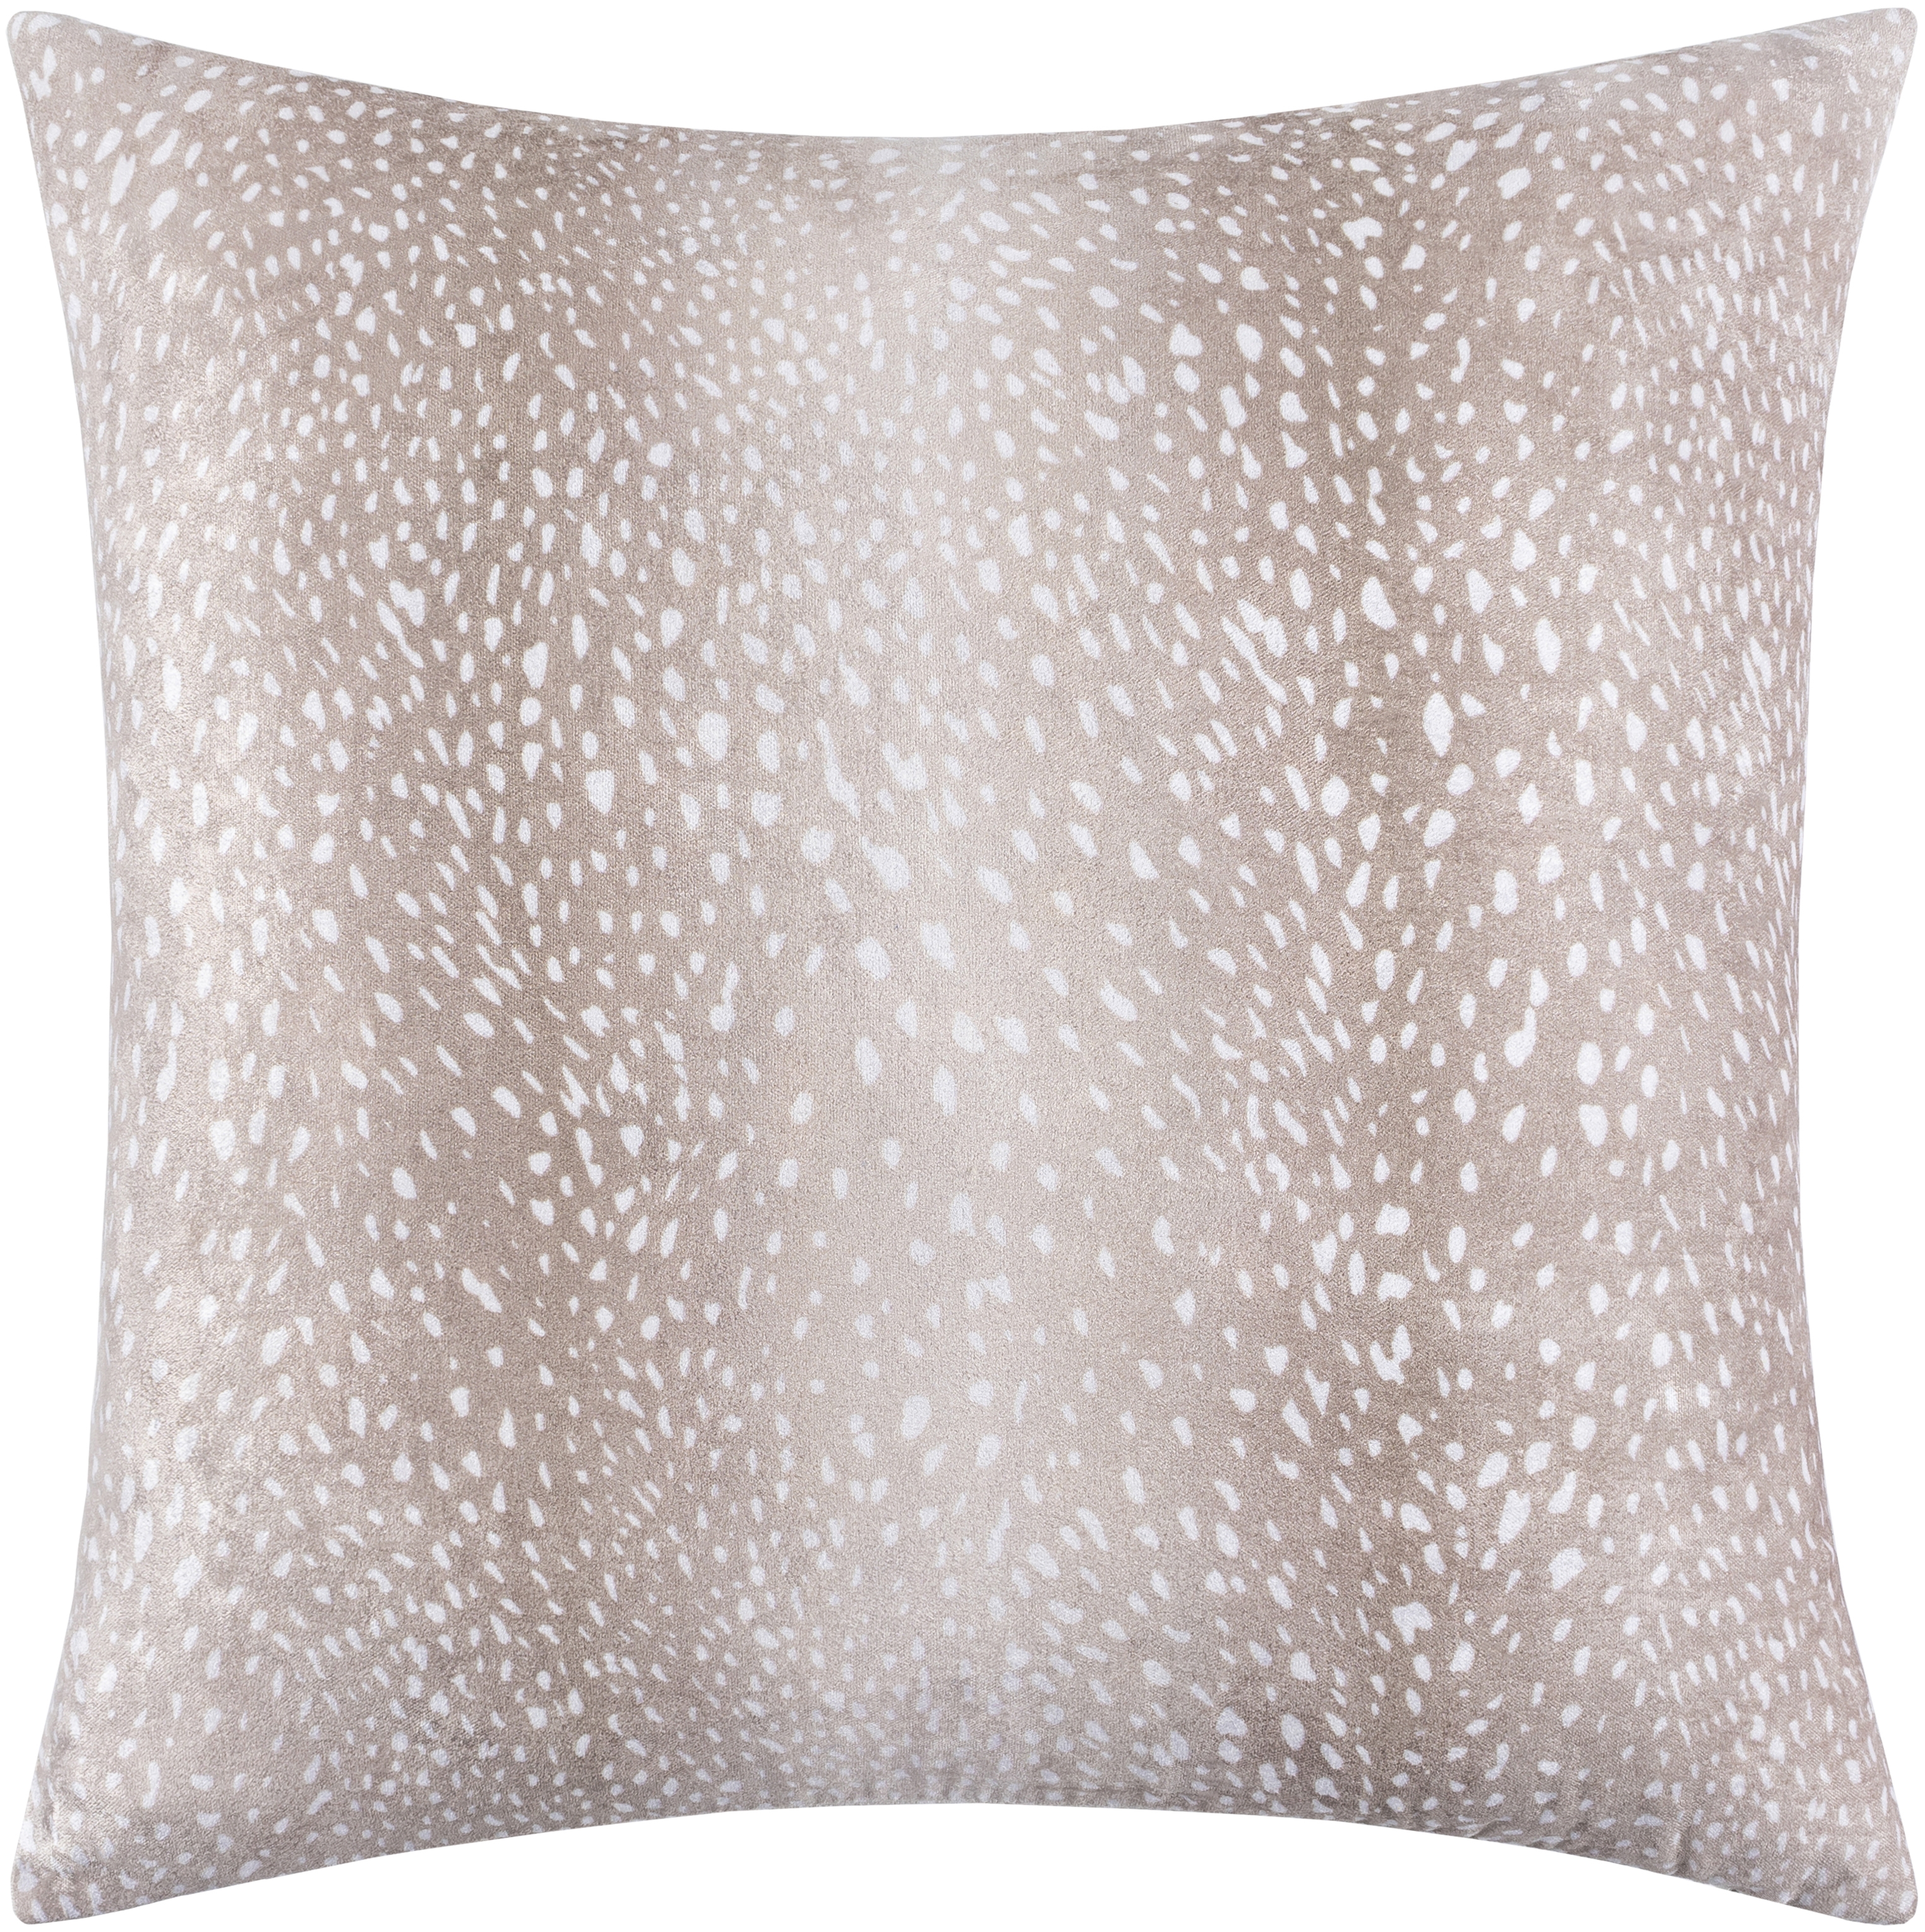 Georgine Pillow, 18" x 18" with polyester insert - Image 0